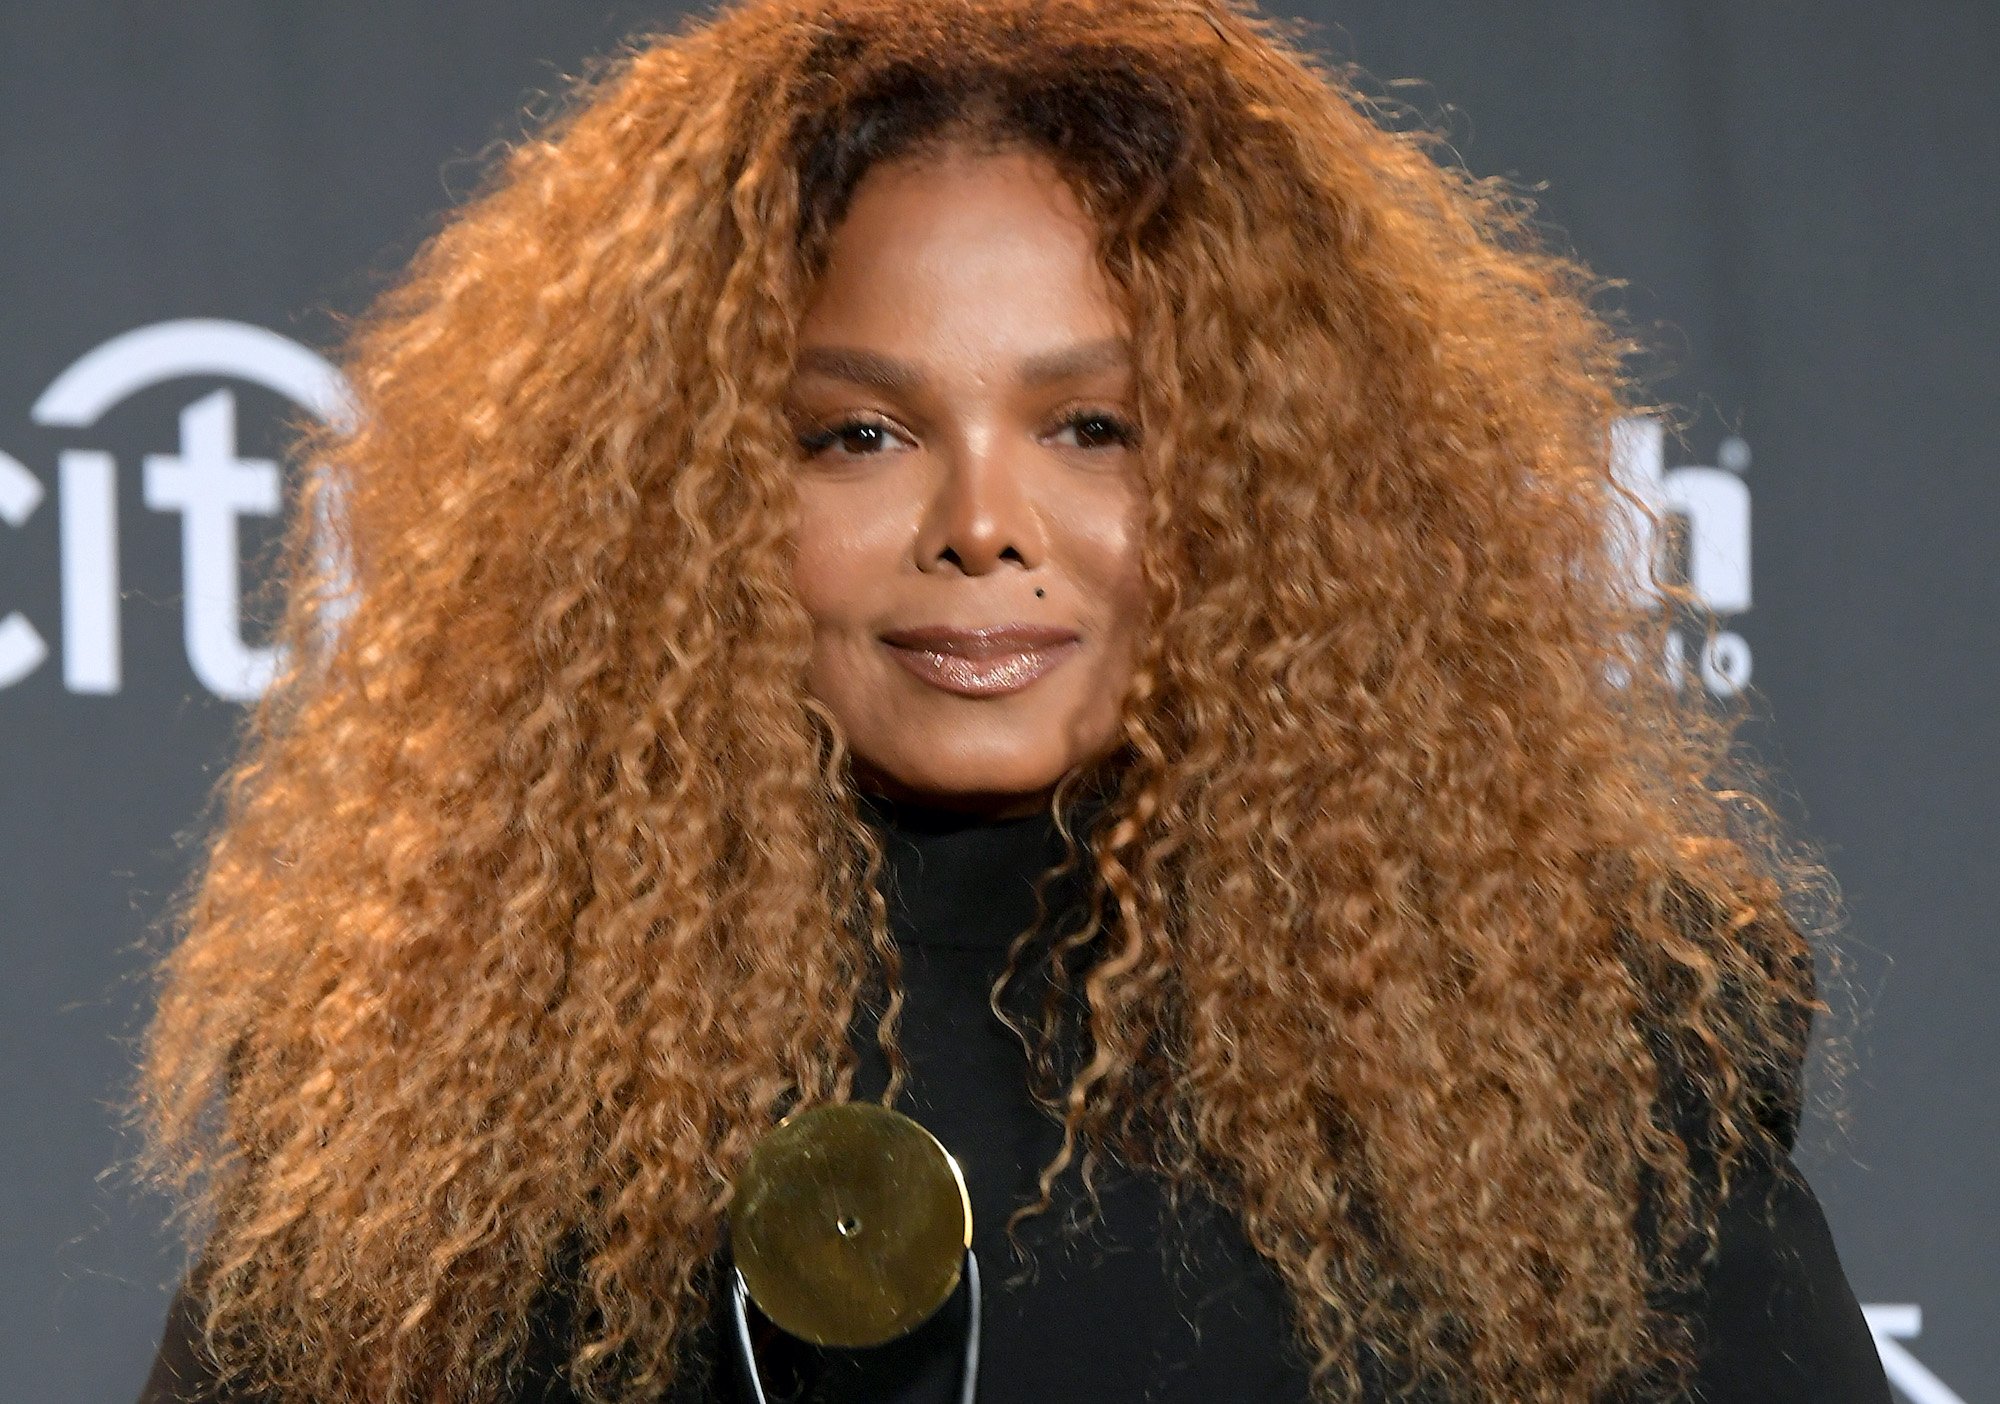 Janet Jackson smiling in front of a black background